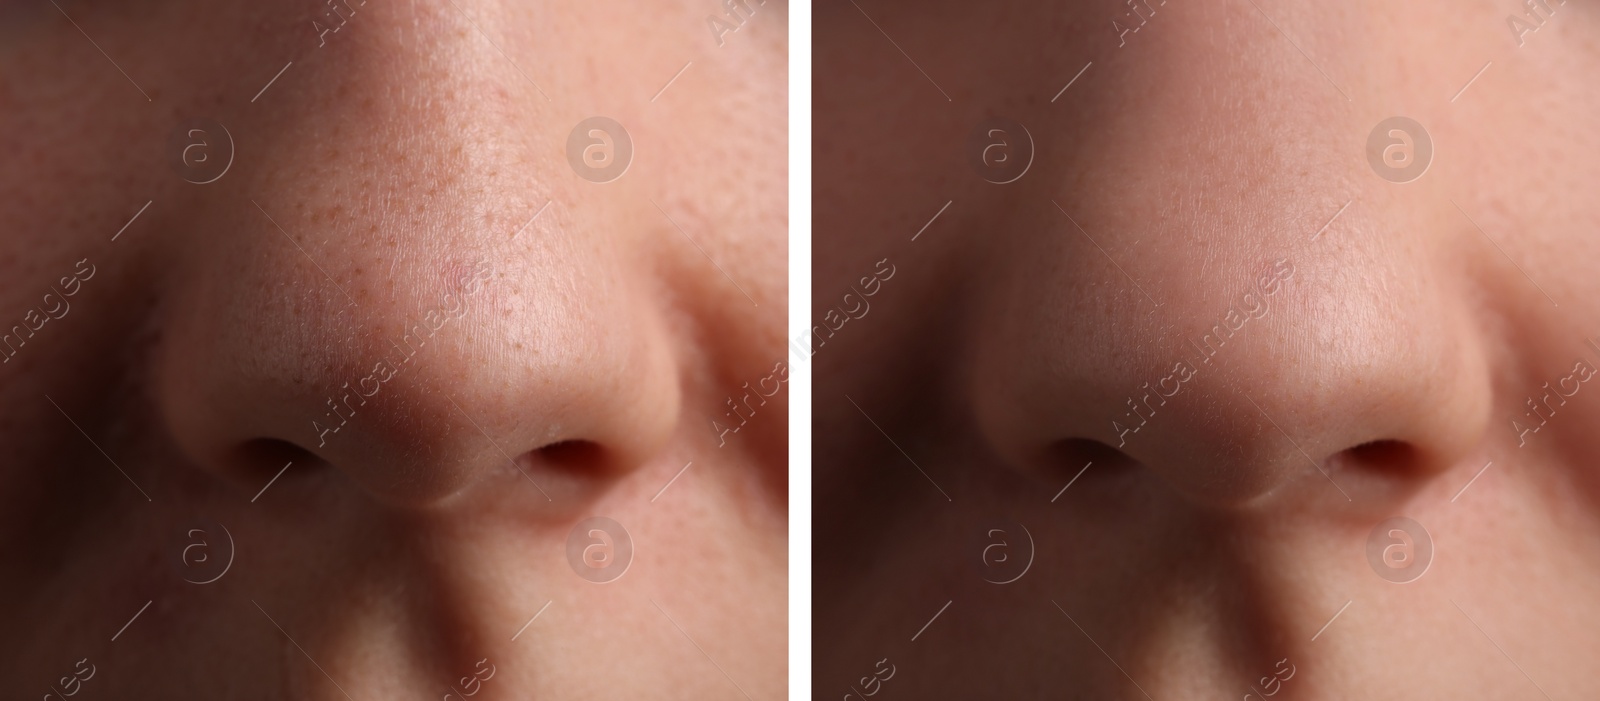 Image of Photos of woman before and after acne treatment, closeup. Collage showing affected and healthy skin